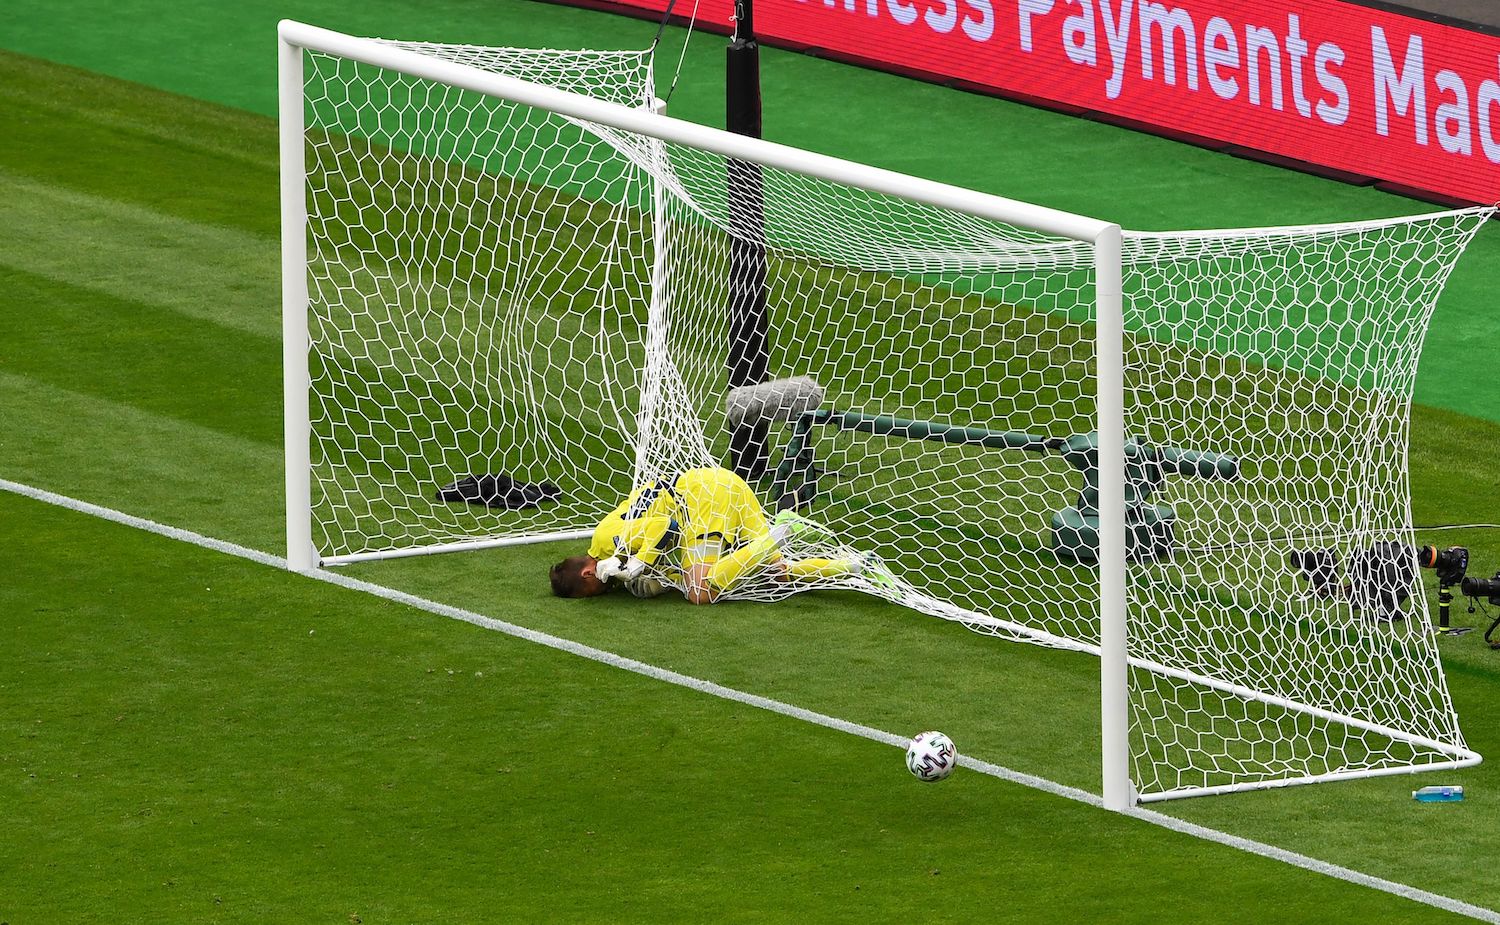 Scotland's goalkeeper David Marshall falls in the net after missing a save on Czech Republic's second goal during the UEFA EURO 2020 Group D football match between Scotland and Czech Republic at Hampden Park in Glasgow on June 14, 2021. (Photo by ANDY BUCHANAN / POOL / AFP) (Photo by ANDY BUCHANAN/POOL/AFP via Getty Images)